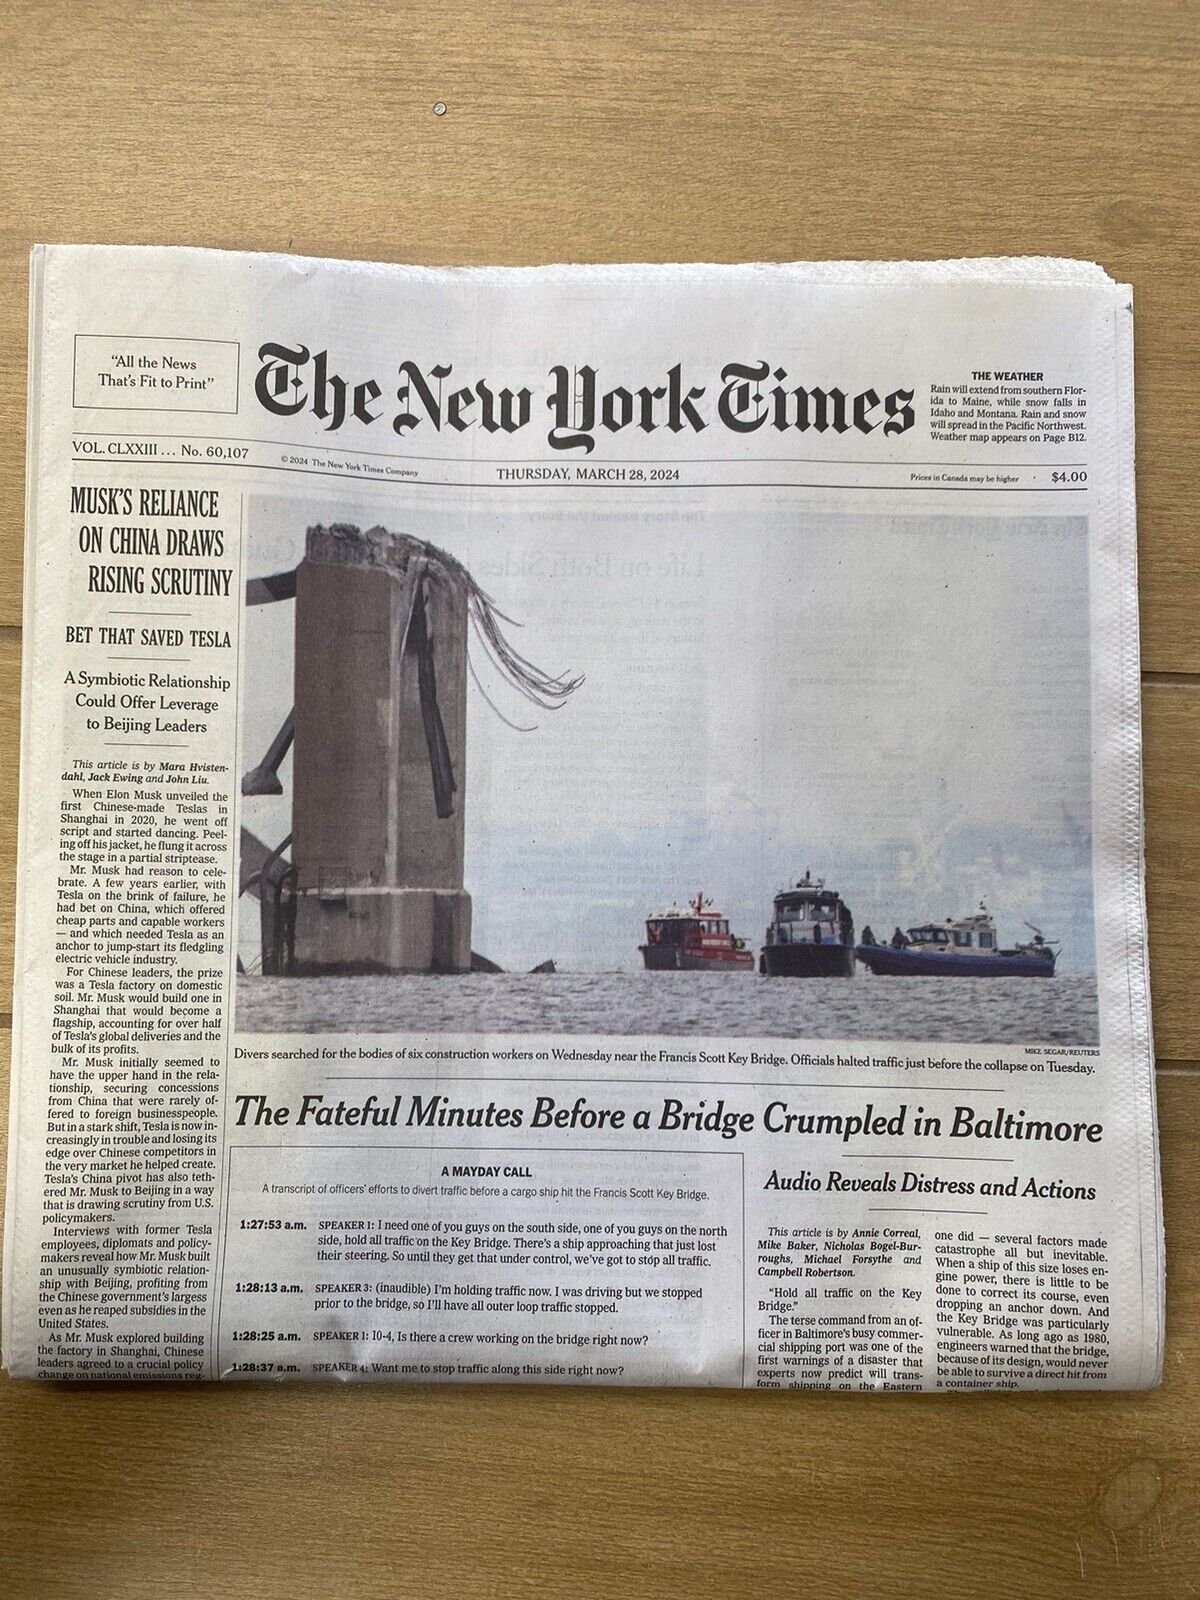 The New York Times Thursday, March 28, 2024 Complete Print Newspaper (NEW)